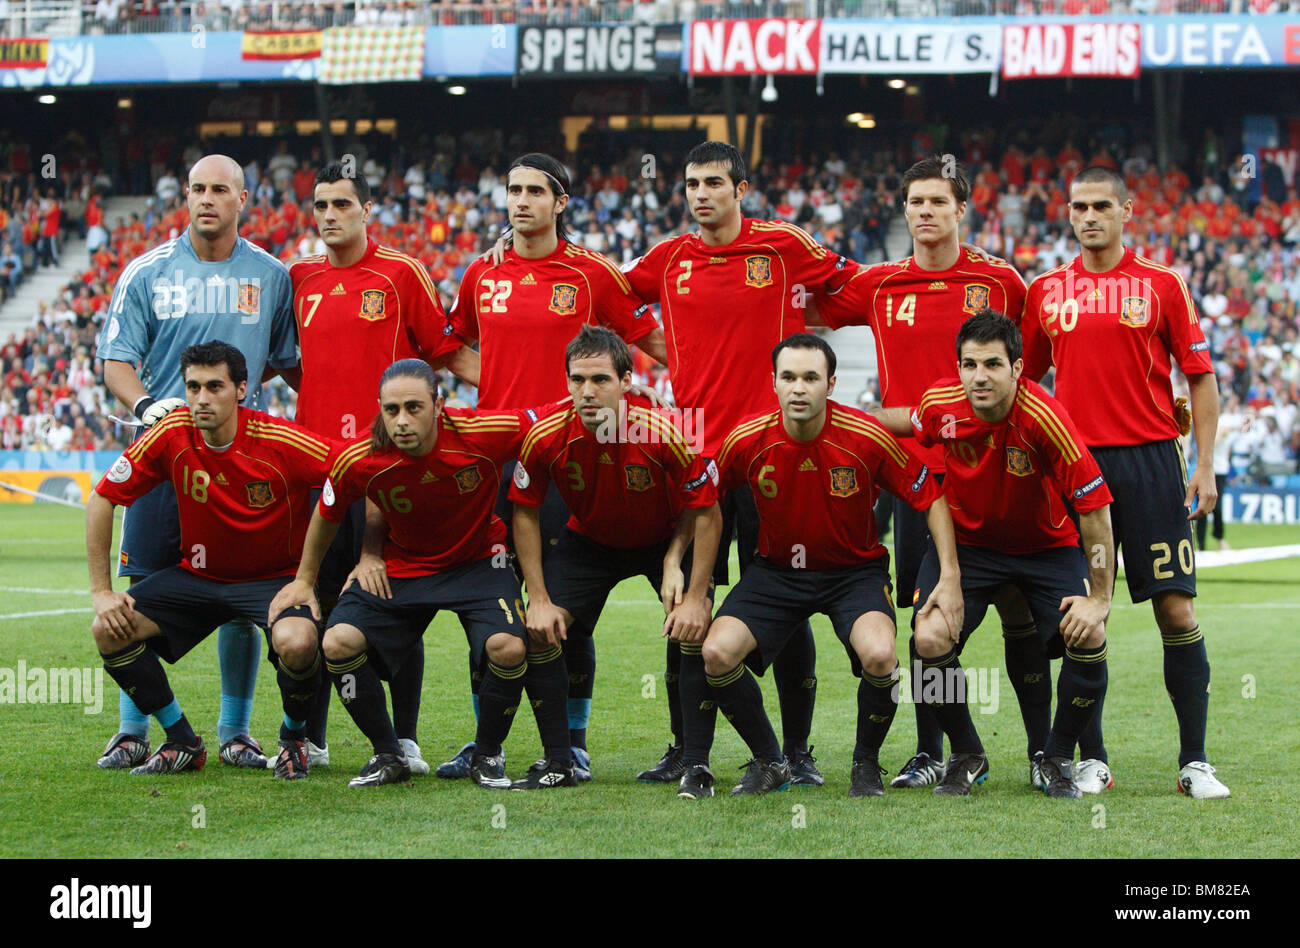 The Spain starting eleven for a UEFA Euro 2008 football match against Greece at Stadion Wals-Siezenheim June 18, 2008. Stock Photo